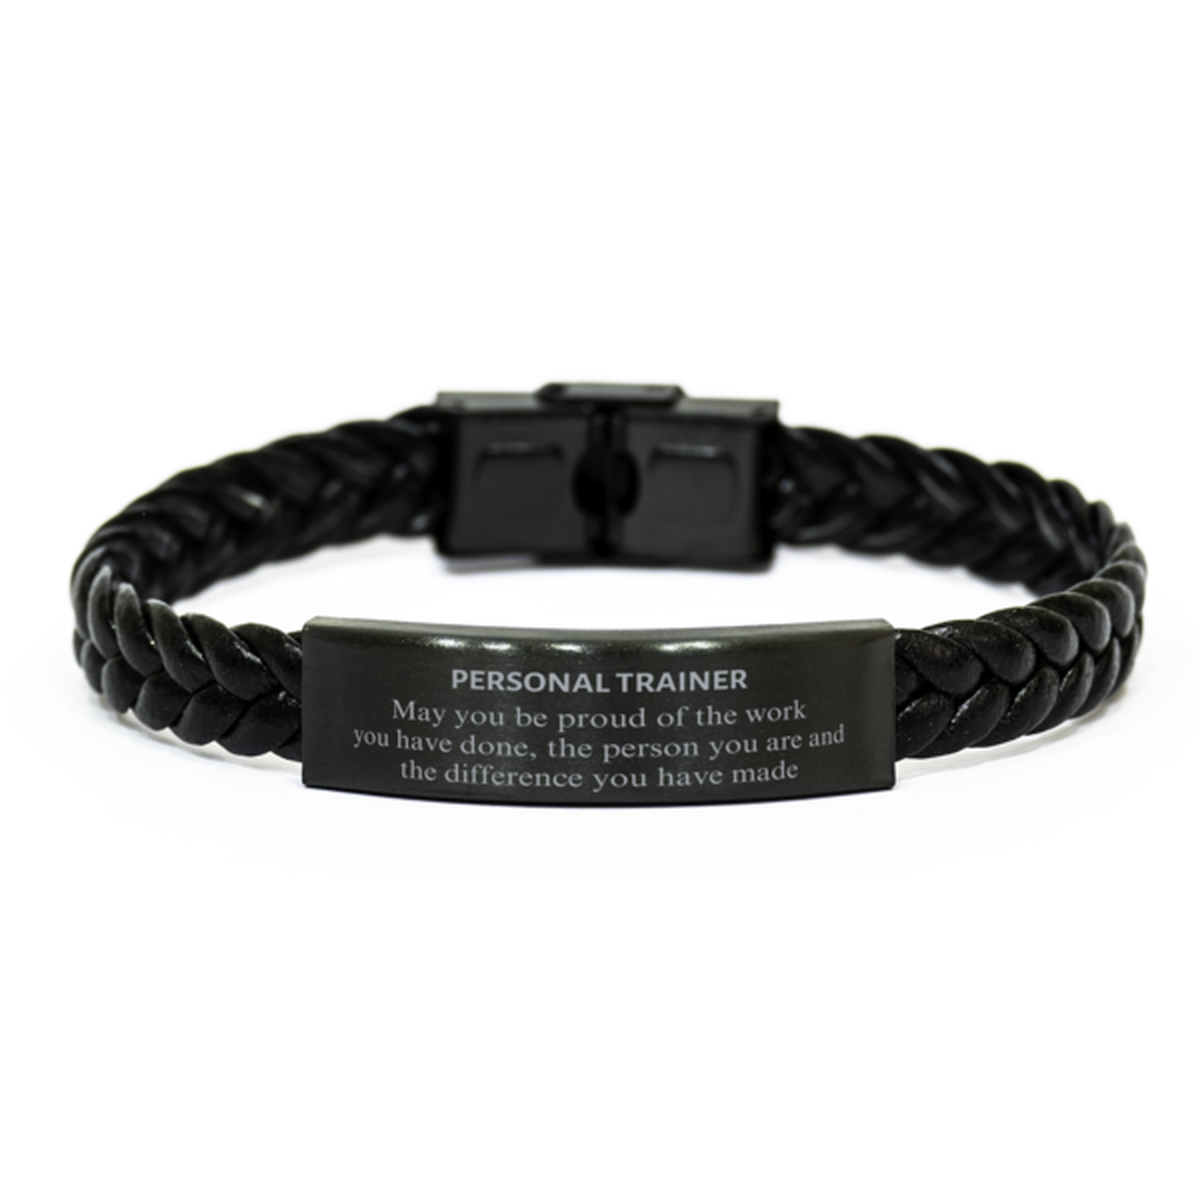 Personal Trainer May you be proud of the work you have done, Retirement Personal Trainer Braided Leather Bracelet for Colleague Appreciation Gifts Amazing for Personal Trainer